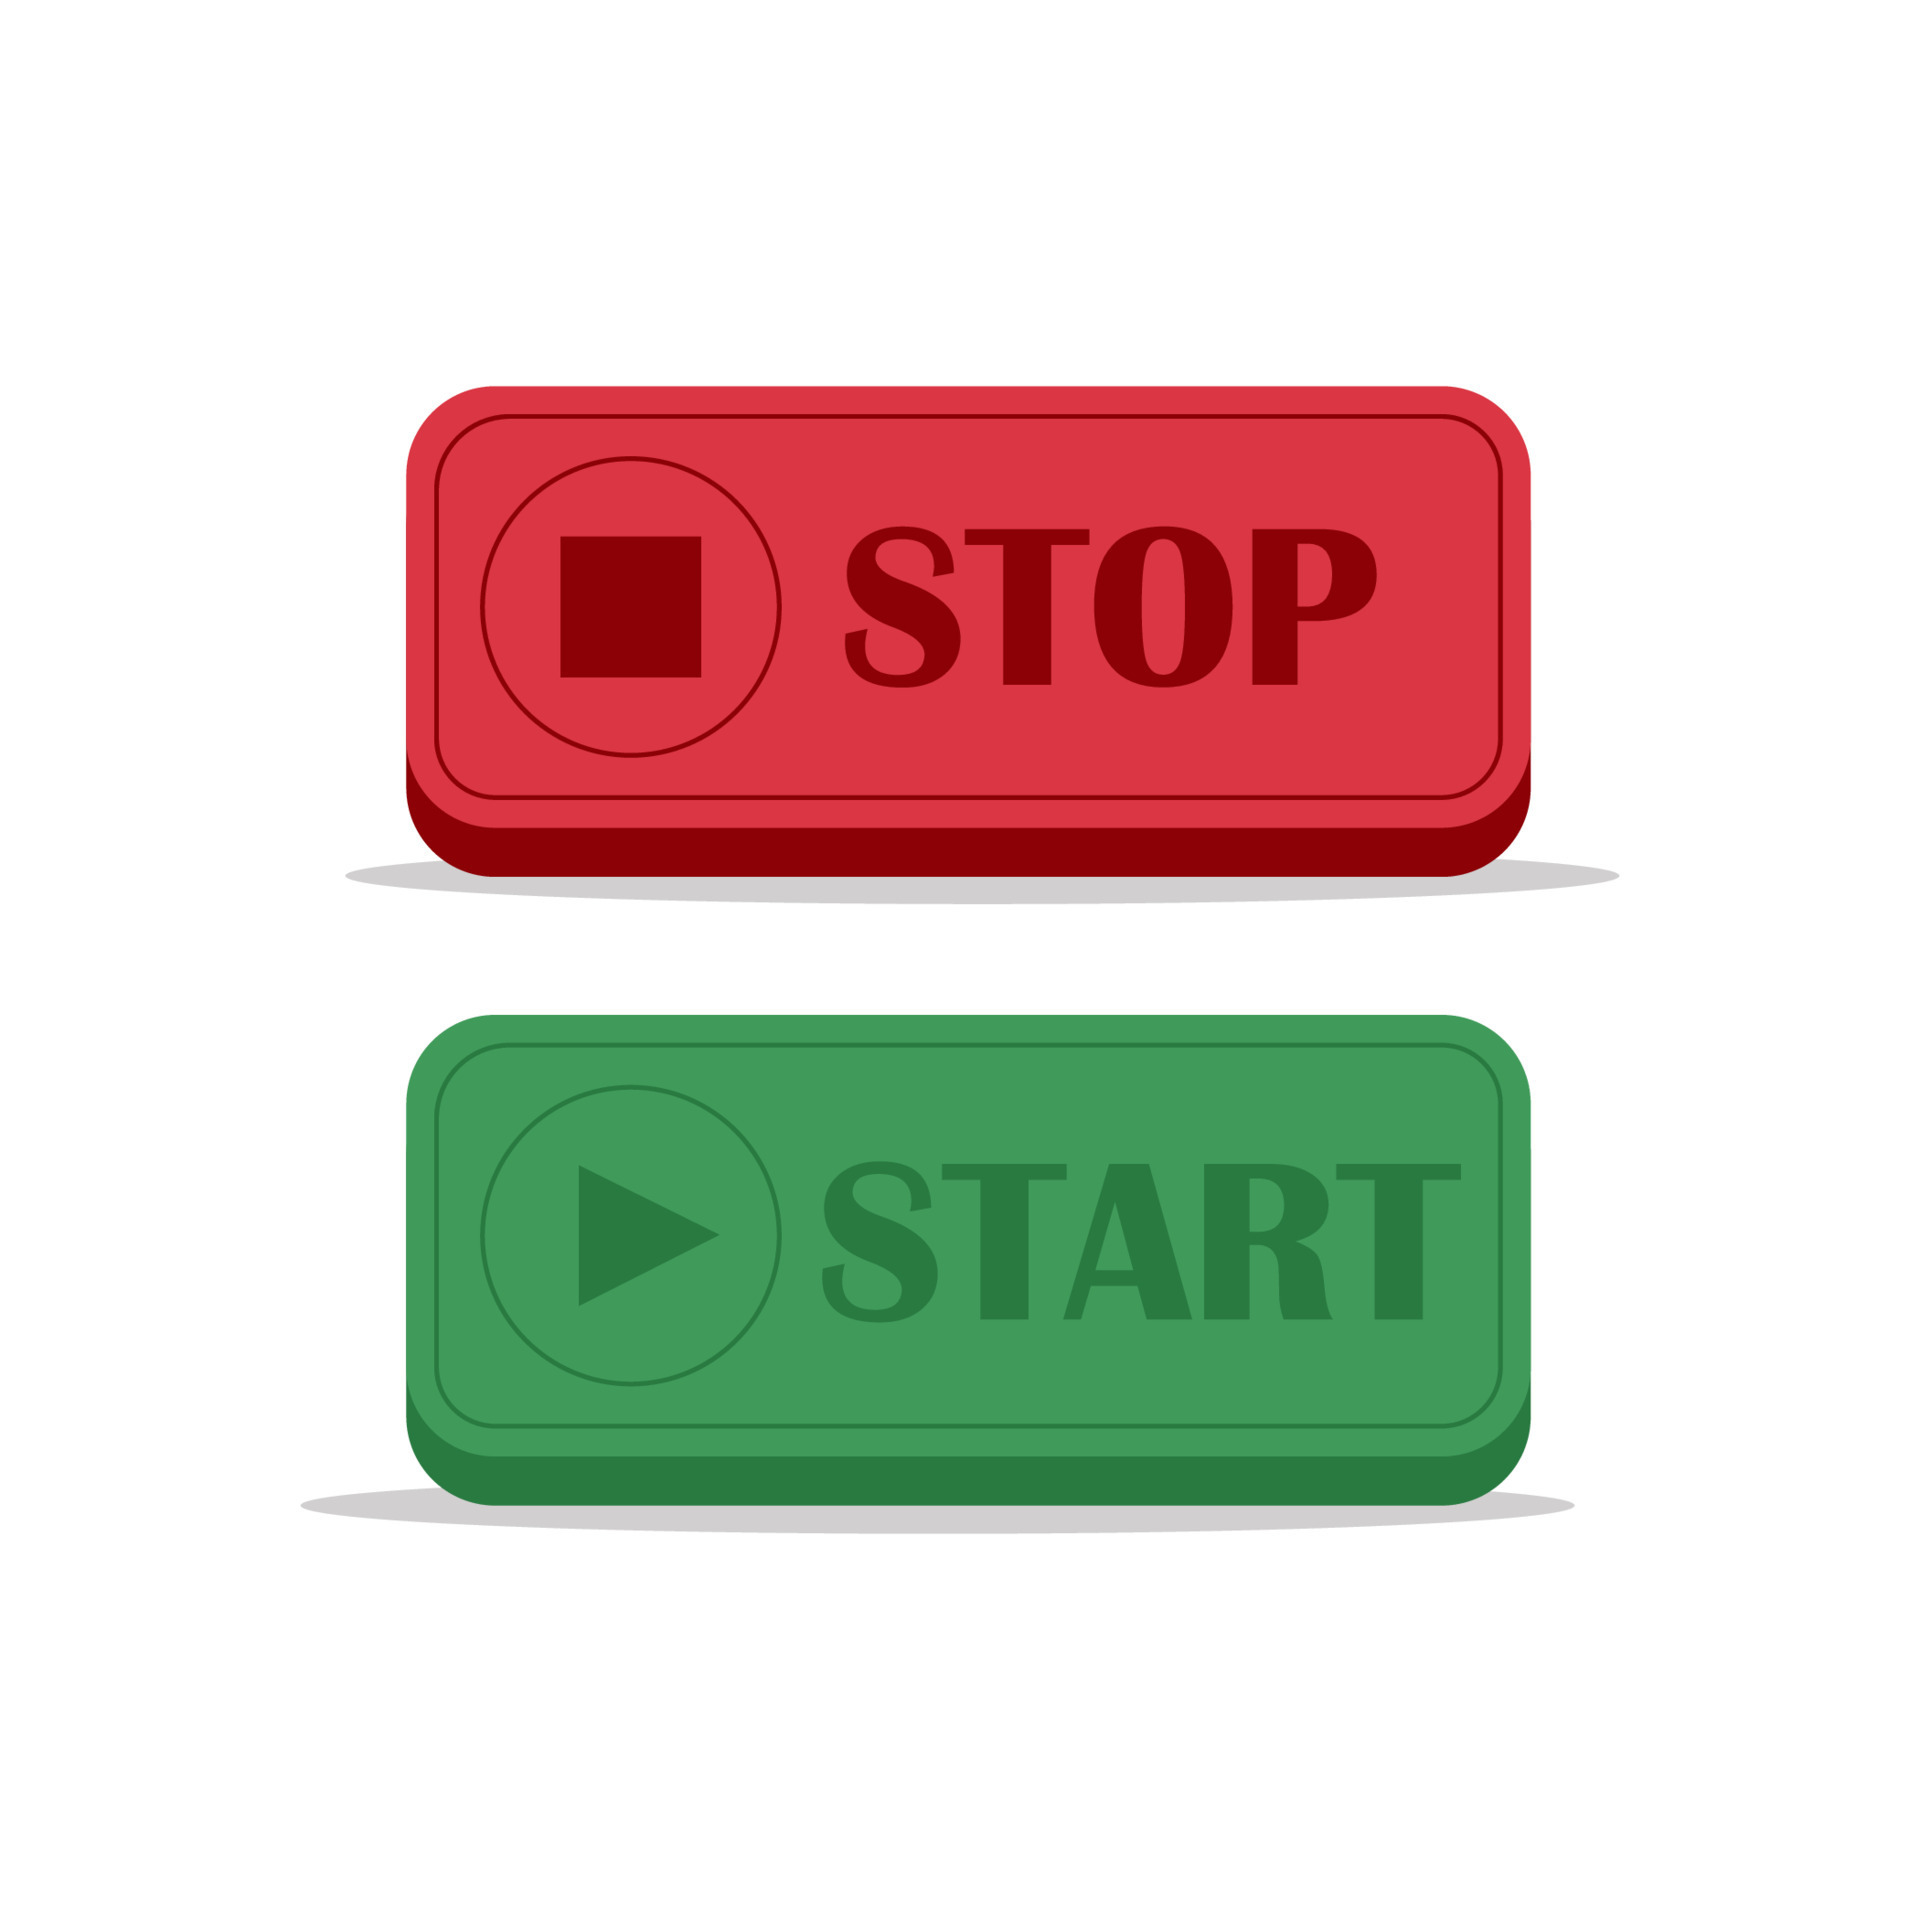 Engine start icon. Red round glossy metallic button. Web and mobile app  design illustration Stock Illustration